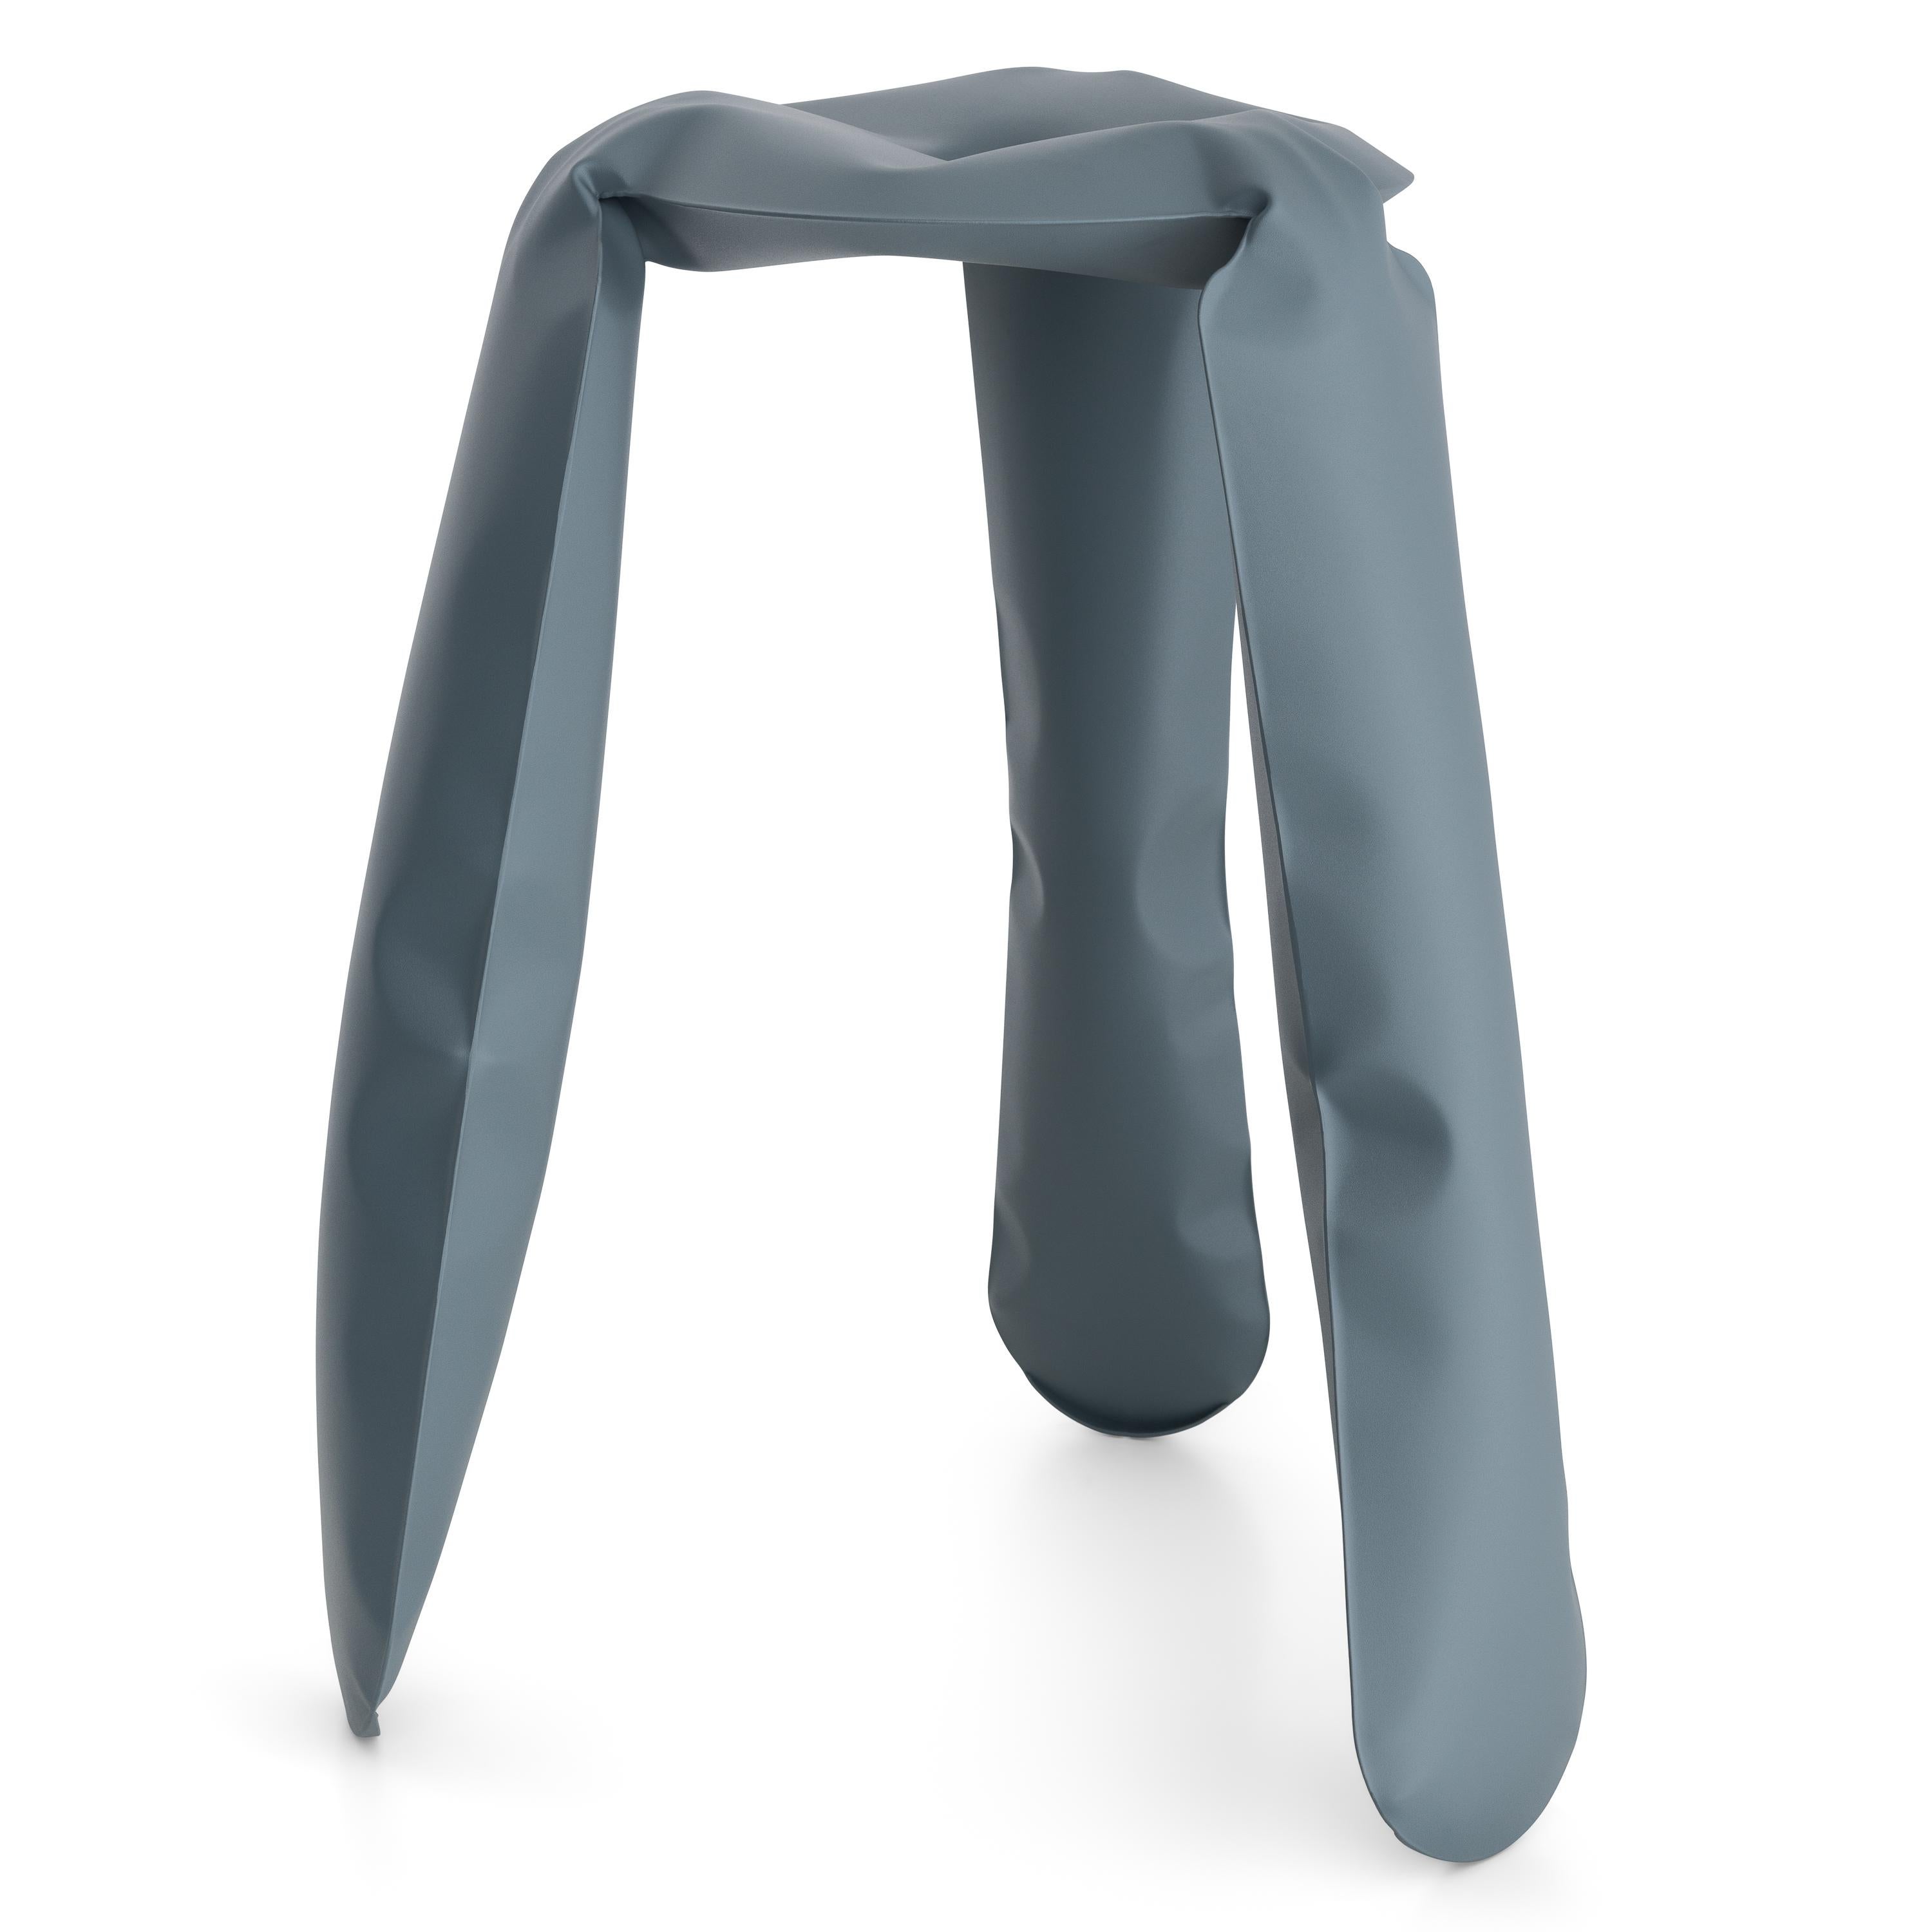 Blue gray steel kitchen plopp stool by Zieta
Dimensions: D 35 x H 65 cm 
Material: Carbon steel. 
Finish: Powder-coated. 
Available in colors: Beige, black, blue, graphite, moss, umbra gray, and flamed gold. Available in stainless steel, aluminum,